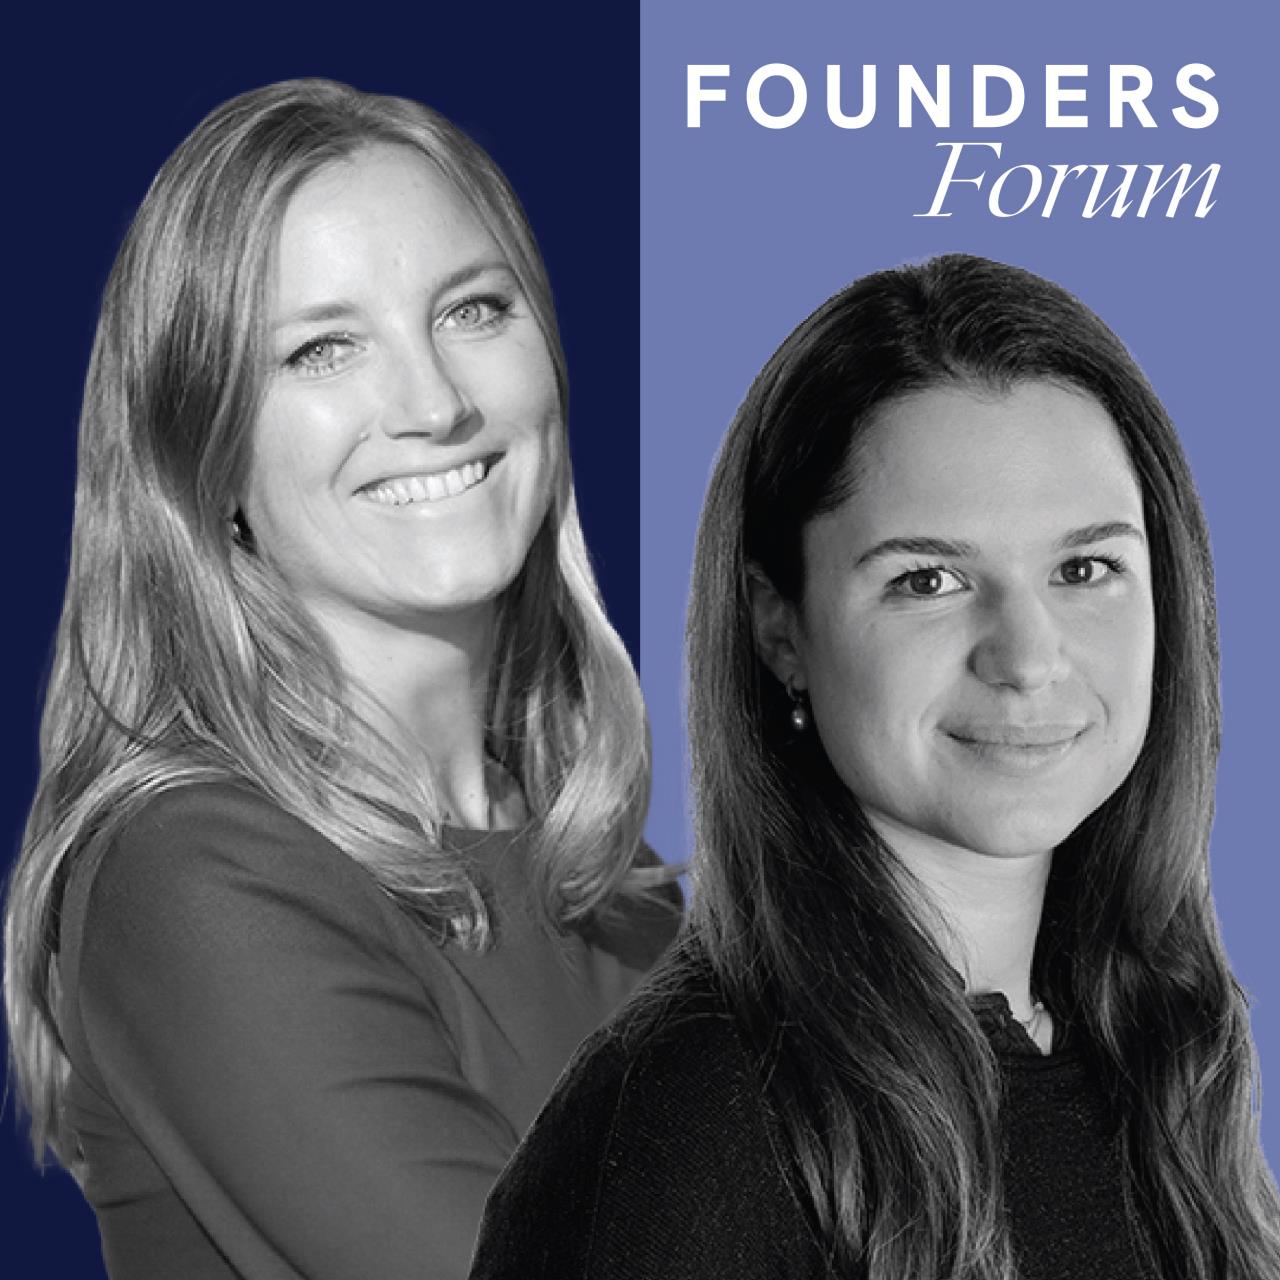 Attend Founders Forum: Answering your Questions on Commercial Law for Entrepreneurs